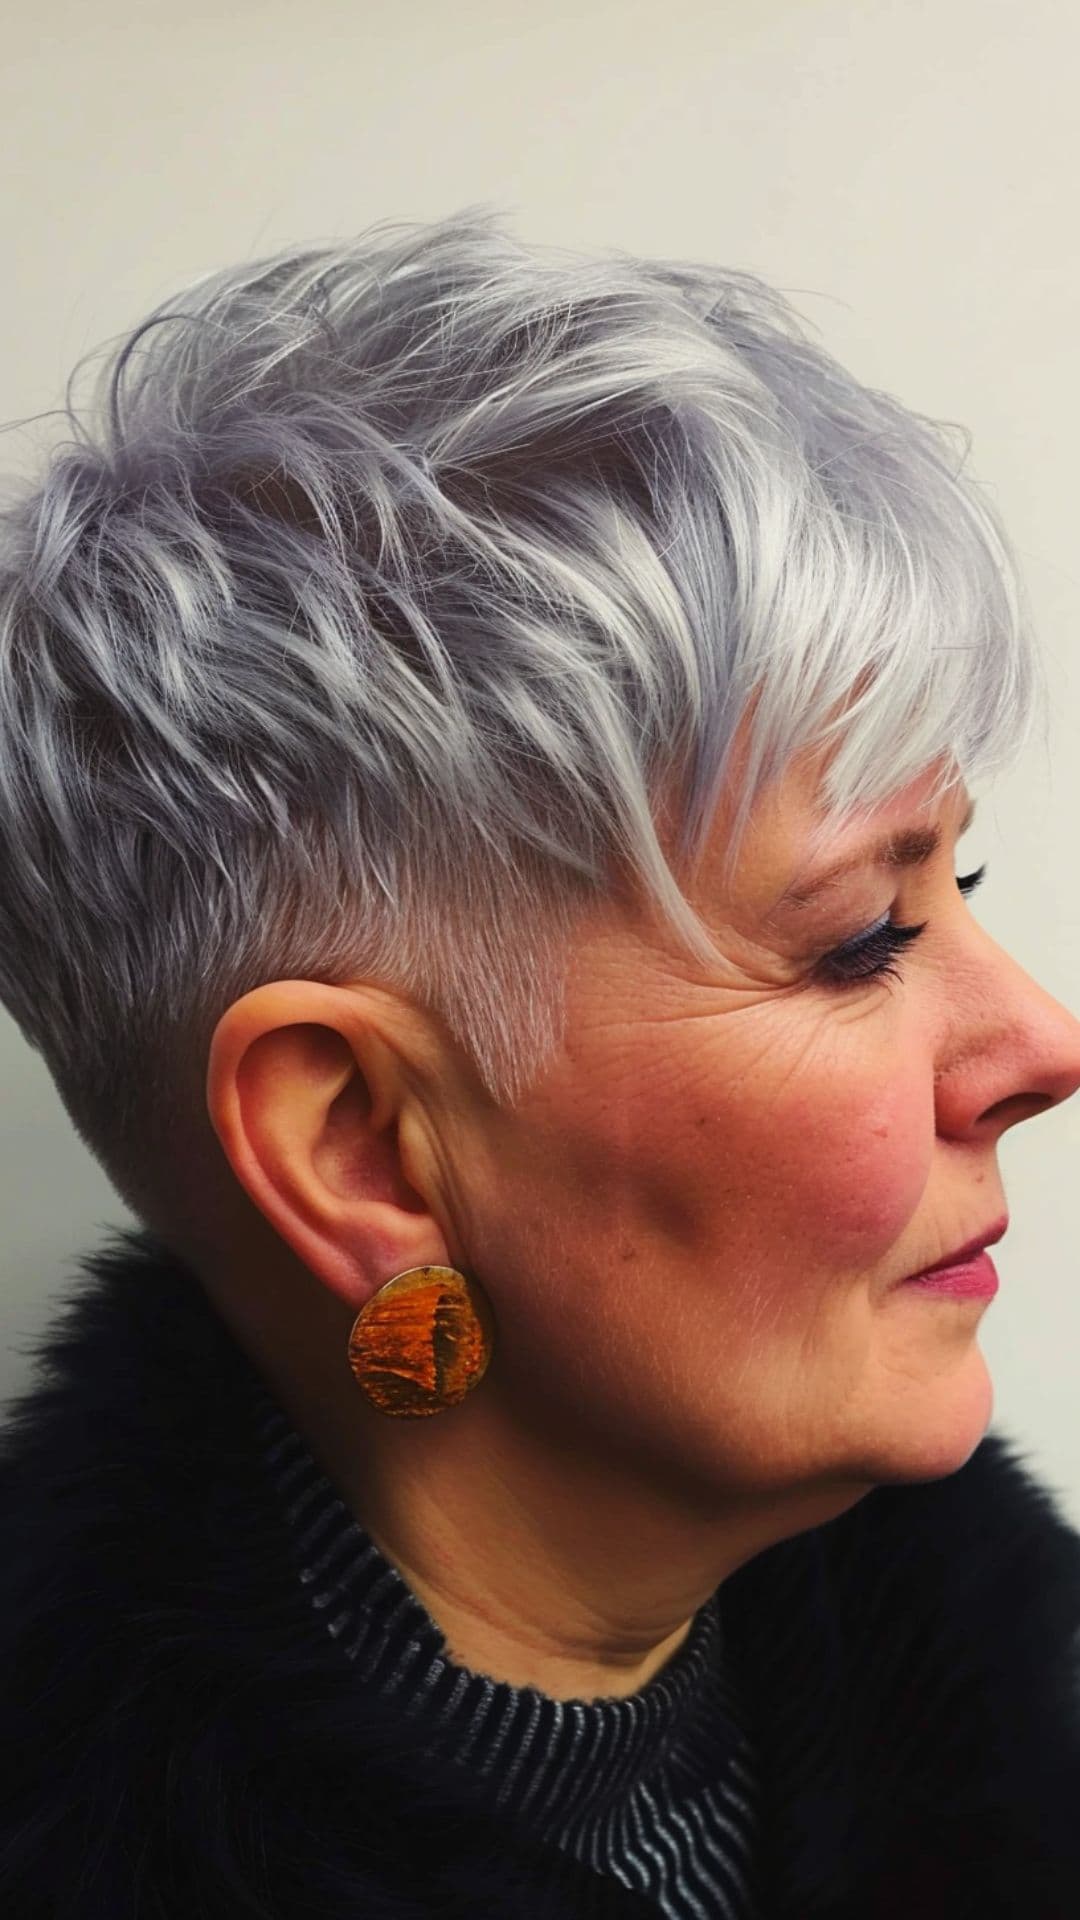 An old woman modelling a textured pixie with undercut.